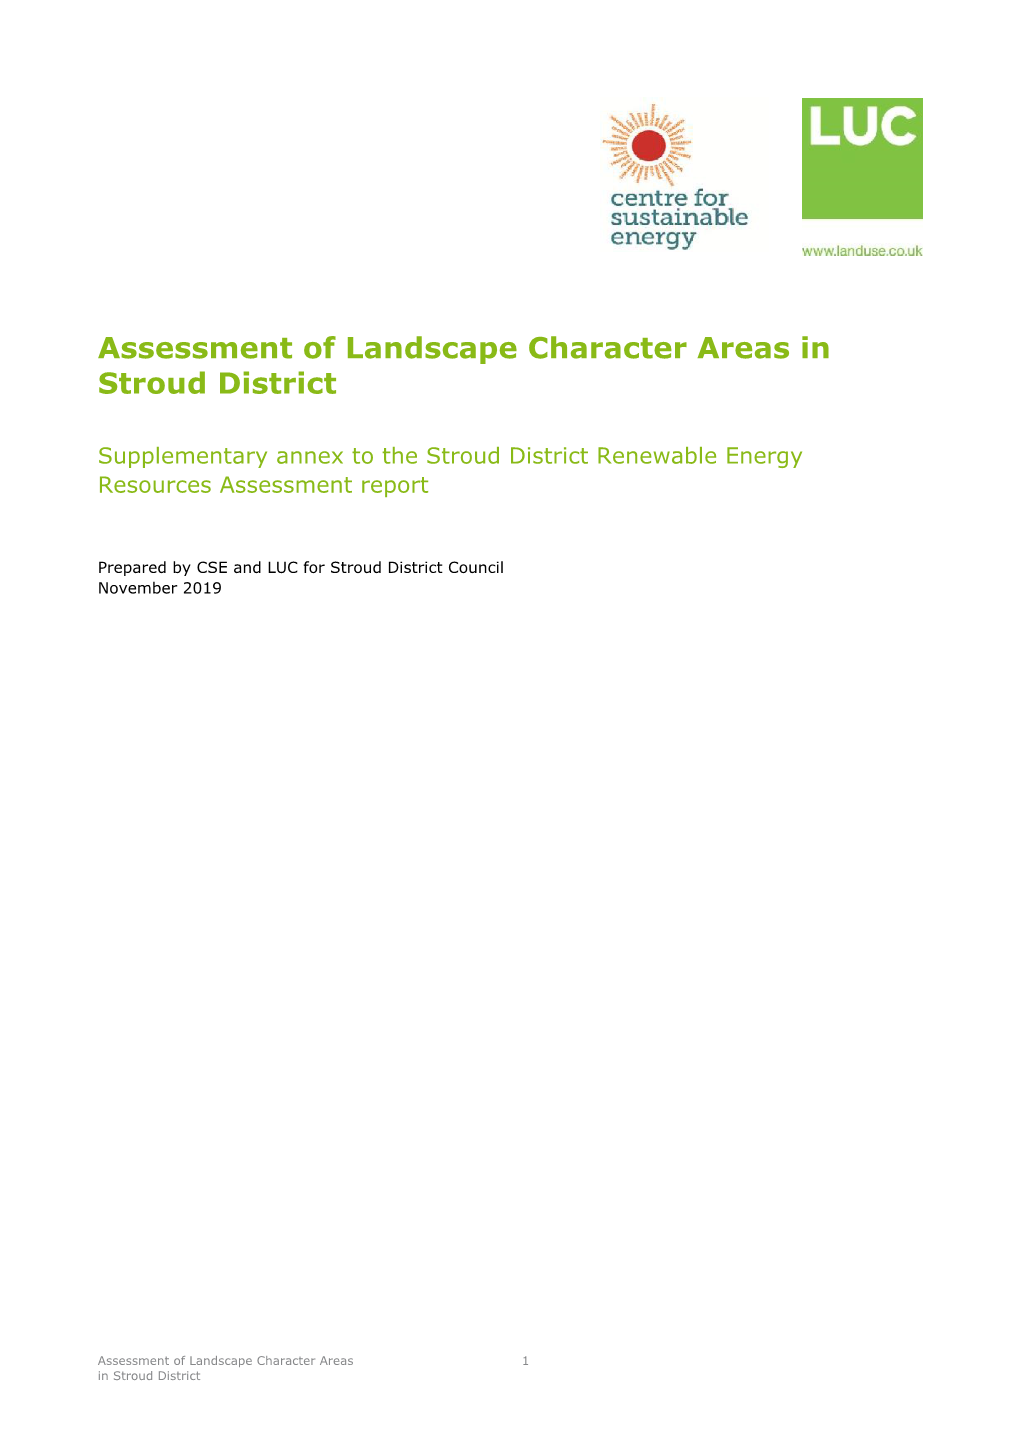 Assessment of Landscape Character Areas in Stroud District